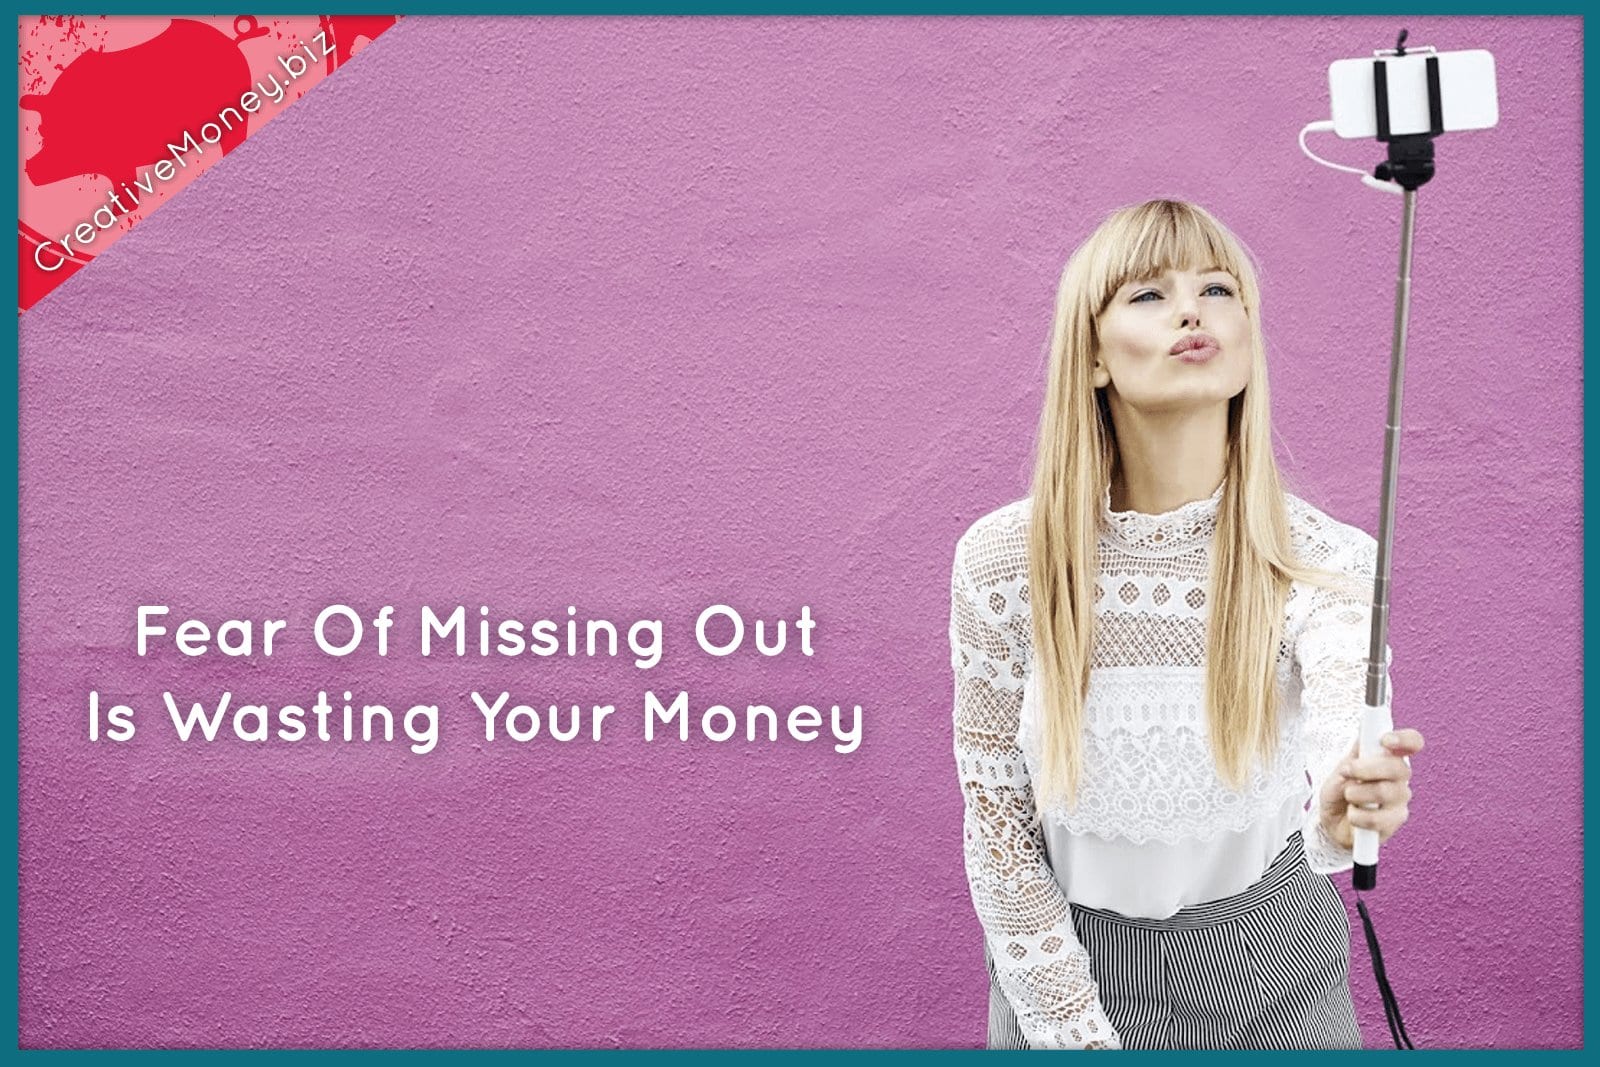 Fear of Missing Out is wasting your money